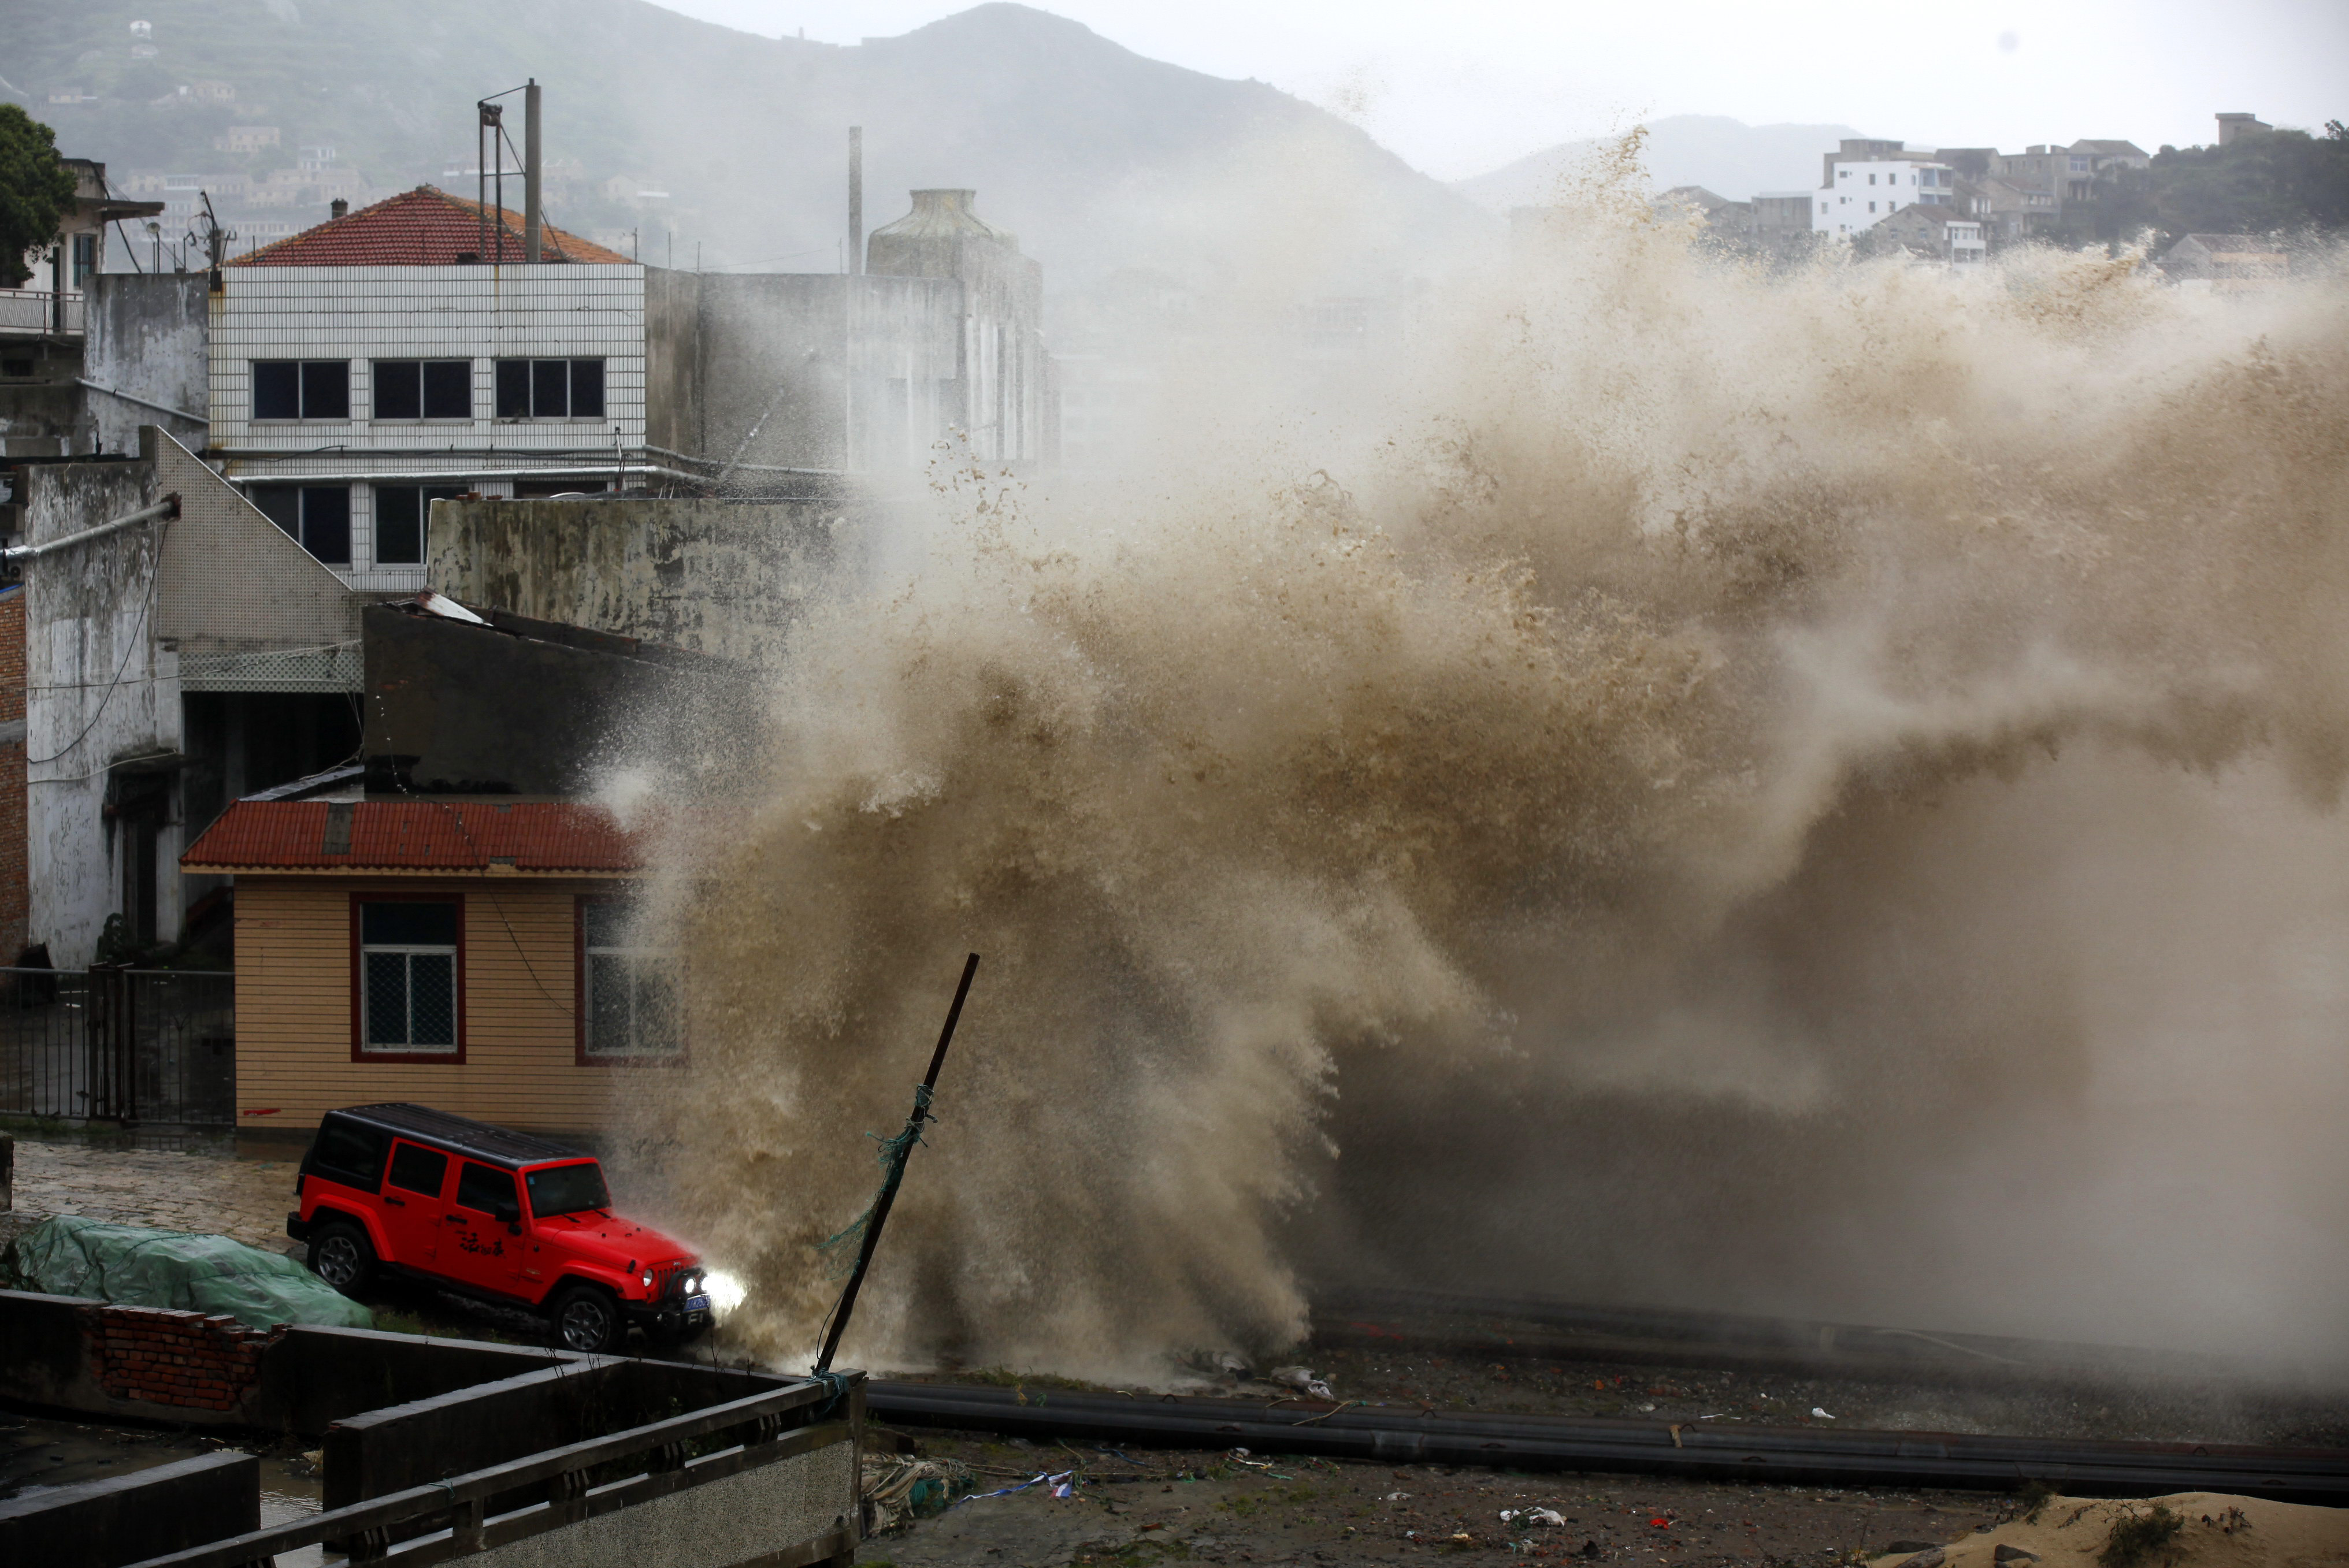 Typhoon roars ashore in China The SpokesmanReview